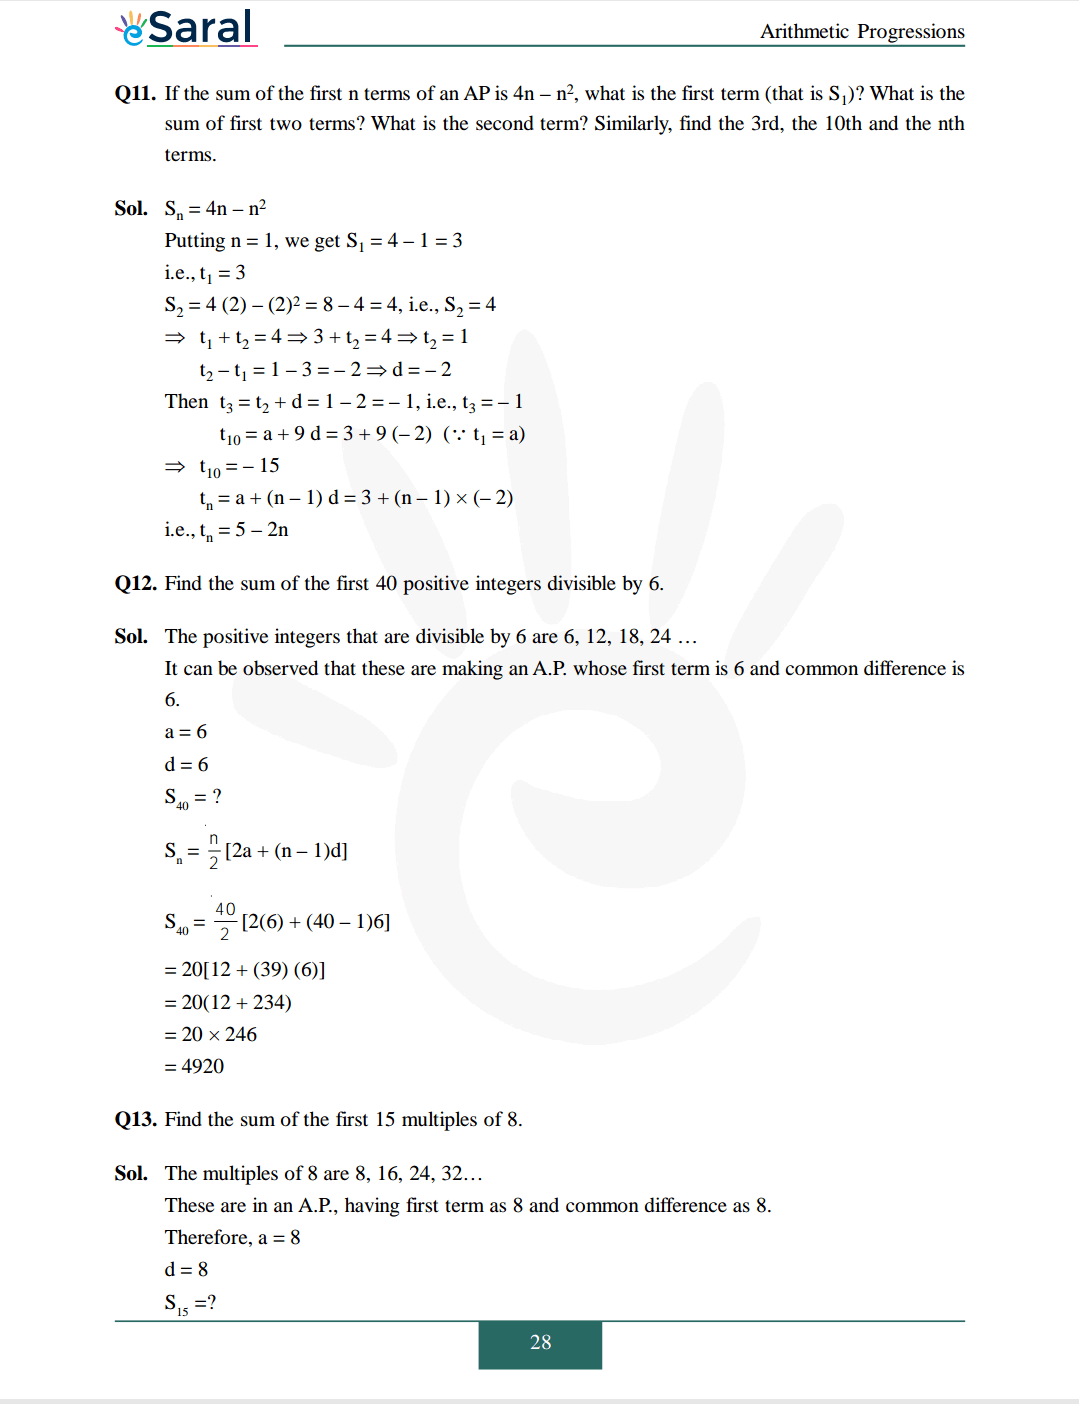 Class 10 Maths Chapter 5 exercise 5.3 solutions Image 10